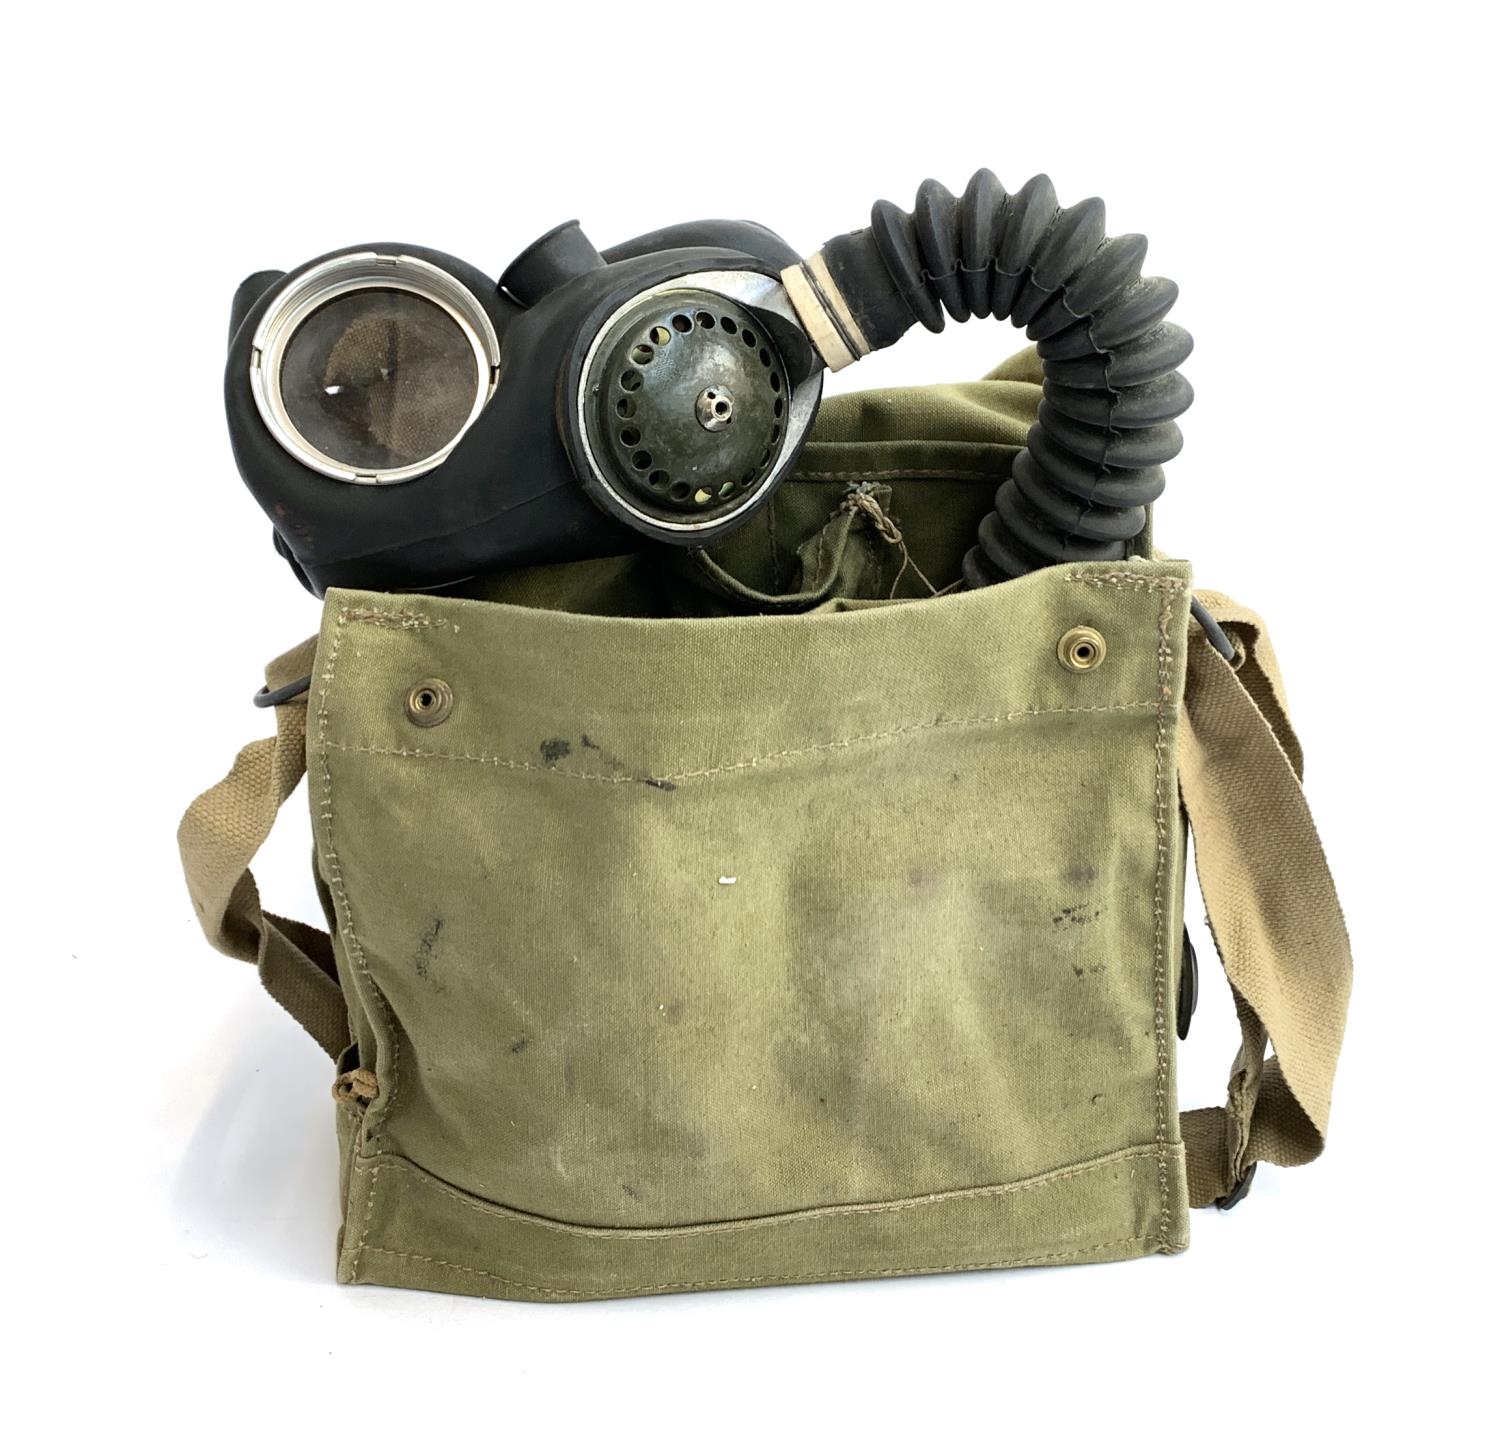 A WWII G&S ltd. 1943 gas mask J.B 3/40 in canvas carry case, together with outfit anti-dimming Mk.